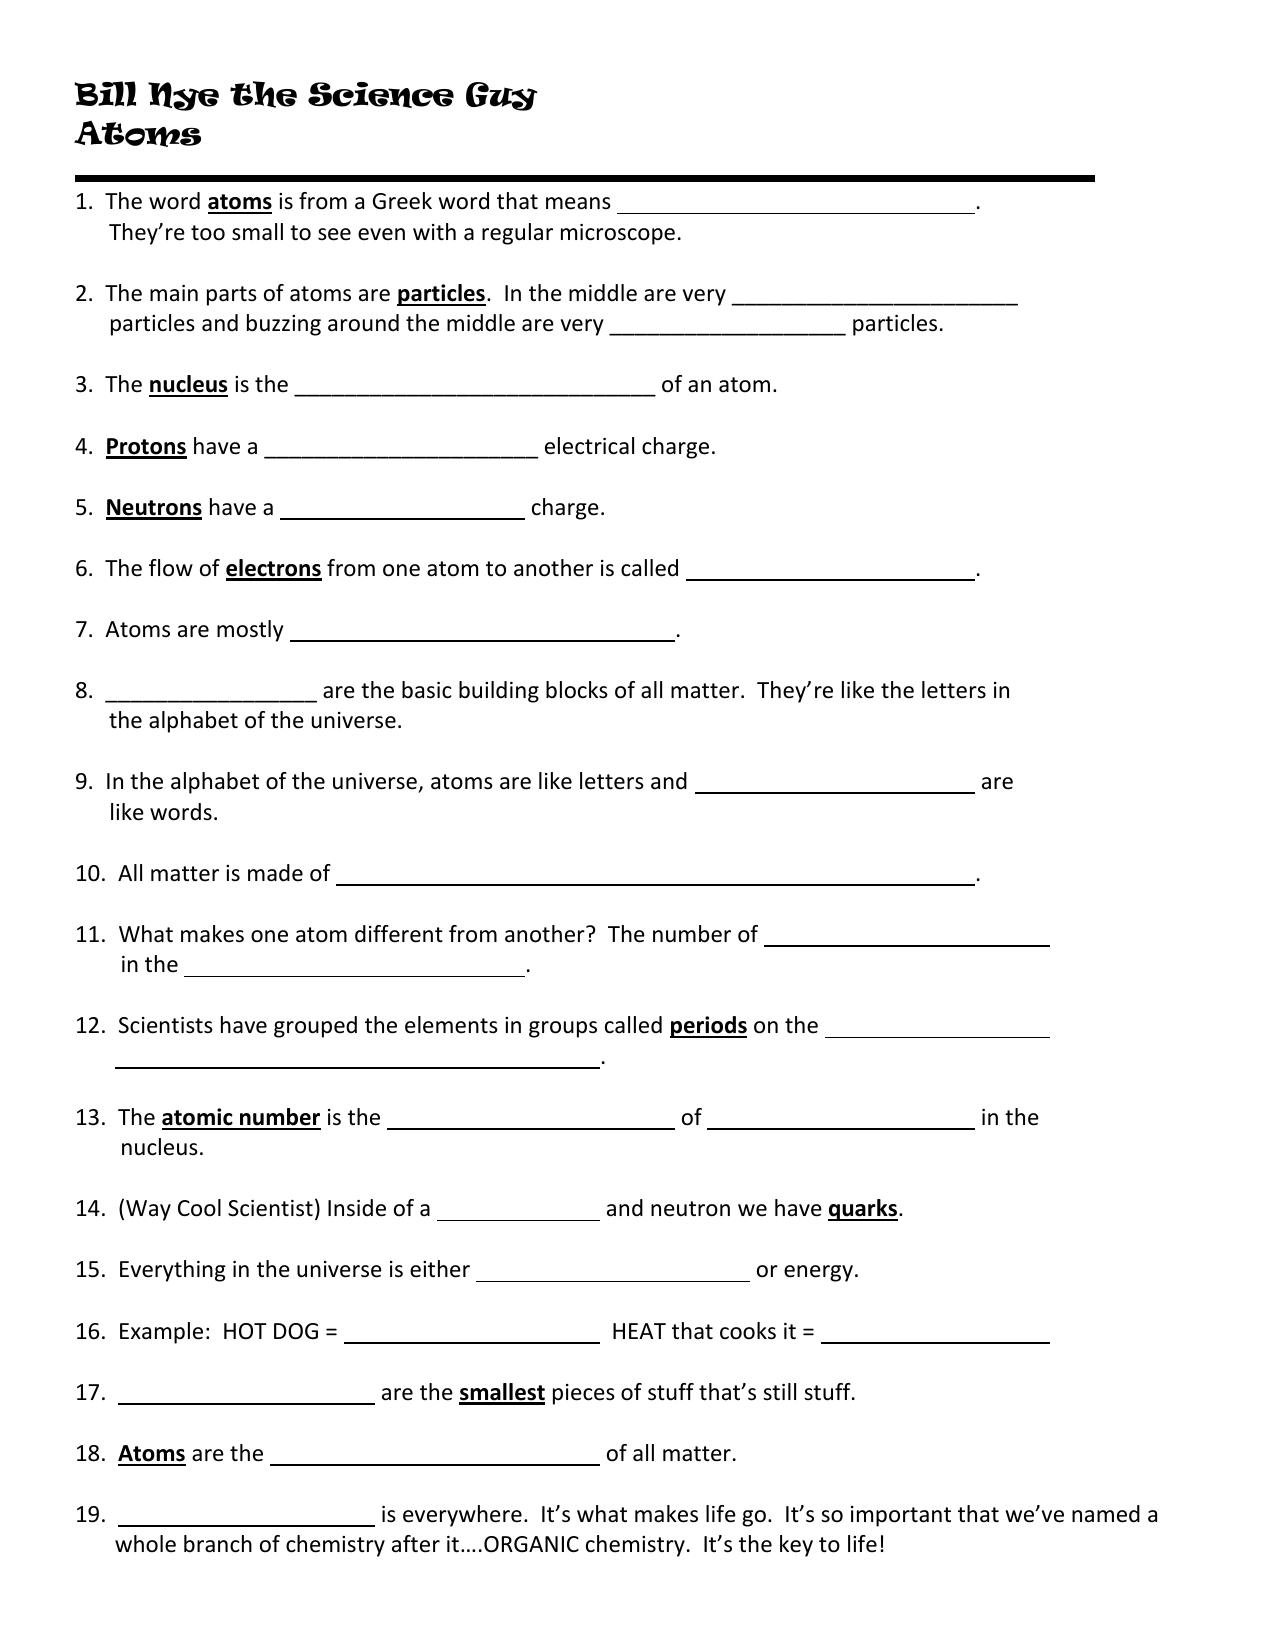 Document Within Bill Nye Atoms Worksheet Answers